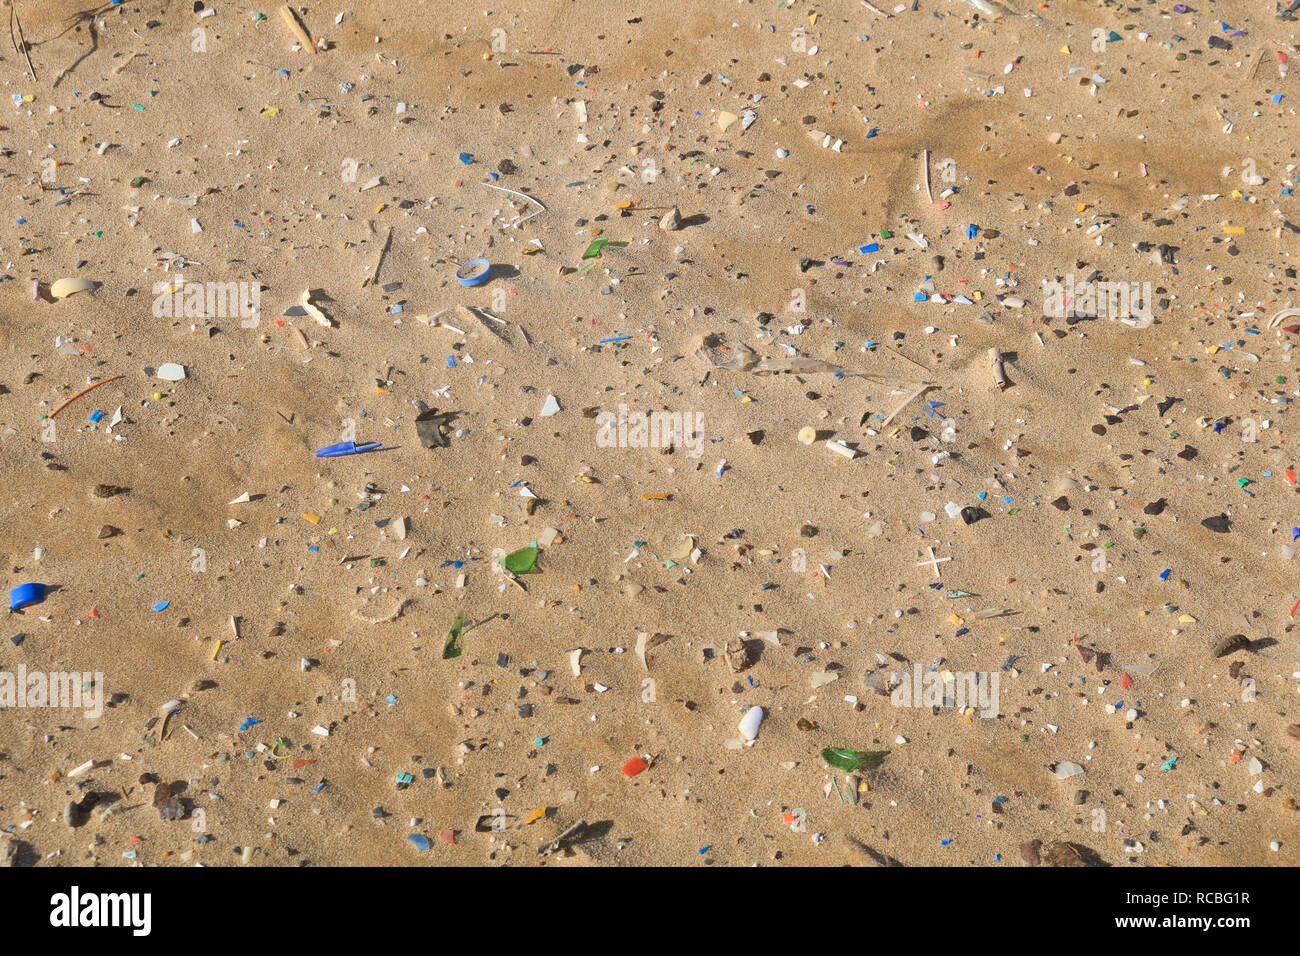 Beirut, Lebanon. 15th January 2019. Hundreds of micro plastic objects  are accumulated on a public beach in South Beirut. It is estimated that 1.1 to 8.8 million metric tons (MT) of plastic waste enters the ocean from coastal communities each year and marine animals have been  harmed by  entanglement in plastic objects Credit: amer ghazzal/Alamy Live News Stock Photo